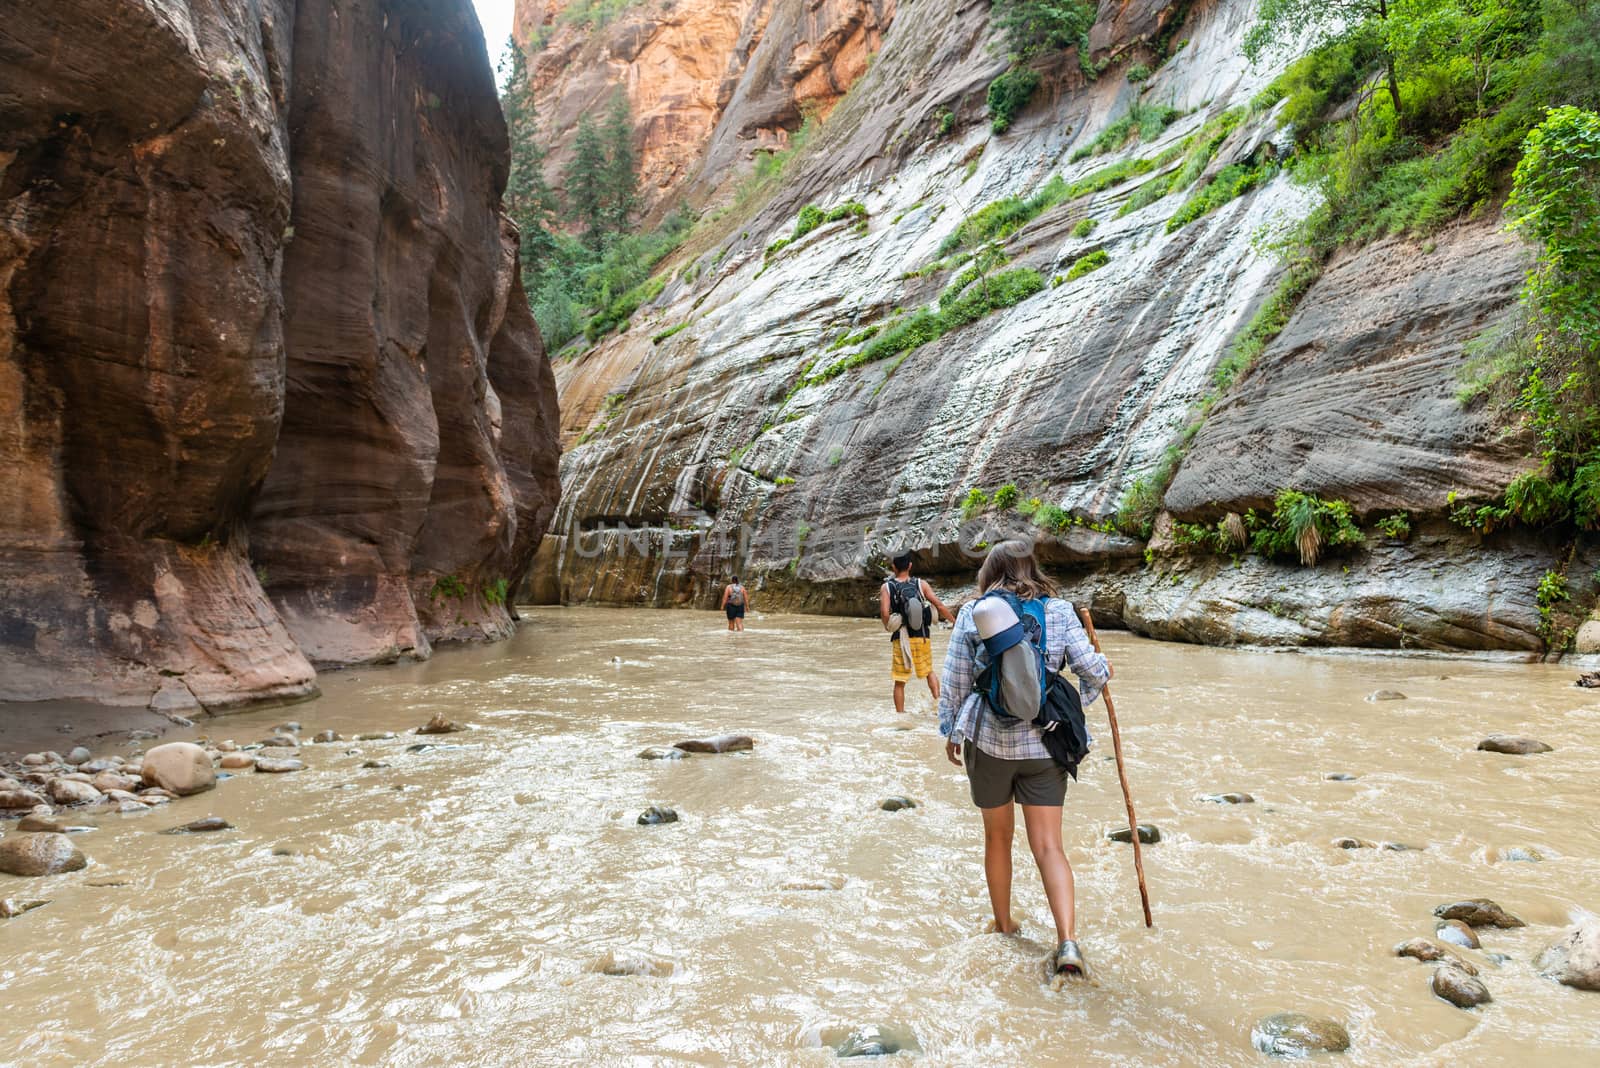 Hikers in the Narrows in Zion National Park, Utah by Njean